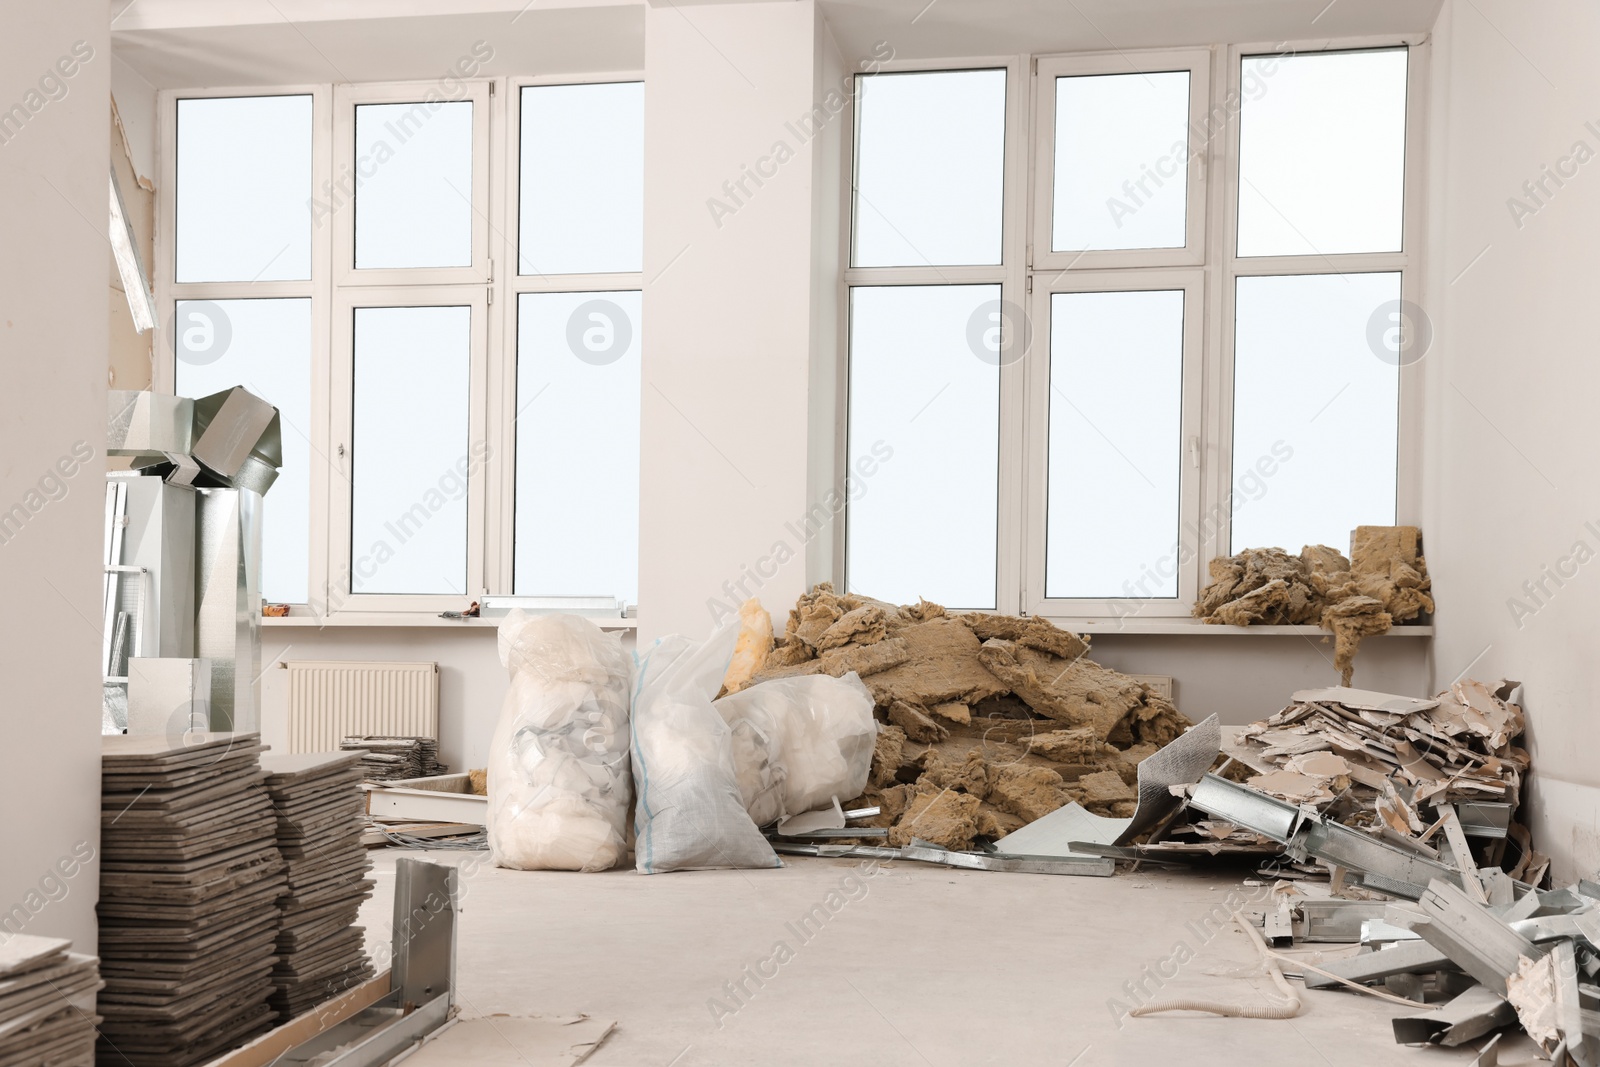 Photo of Building materials in room prepared for renovation